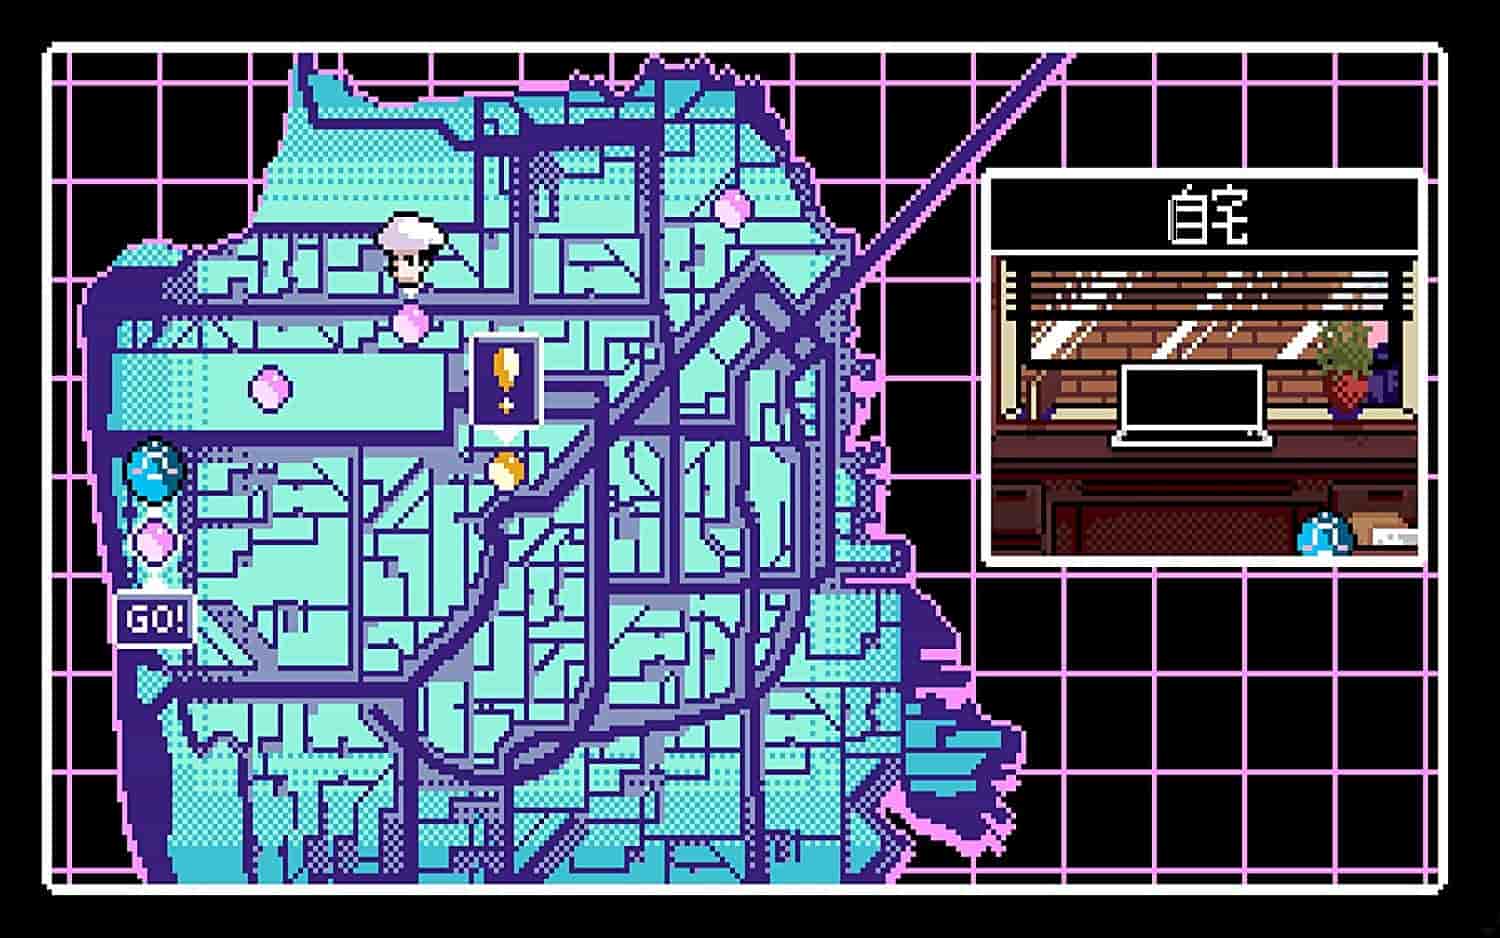 2064: Read Only Memories INTEGRAL, 2064 Read Only Memories INTEGRAL, 2064: ROM INTEGRAL, 2064 ROM INTEGRAL, Chorus Worldwide, Japan, Nintendo Switch, Switch, Price, Pre-order, Features, Screenshots, Physical Release, Retail, Physical Edition